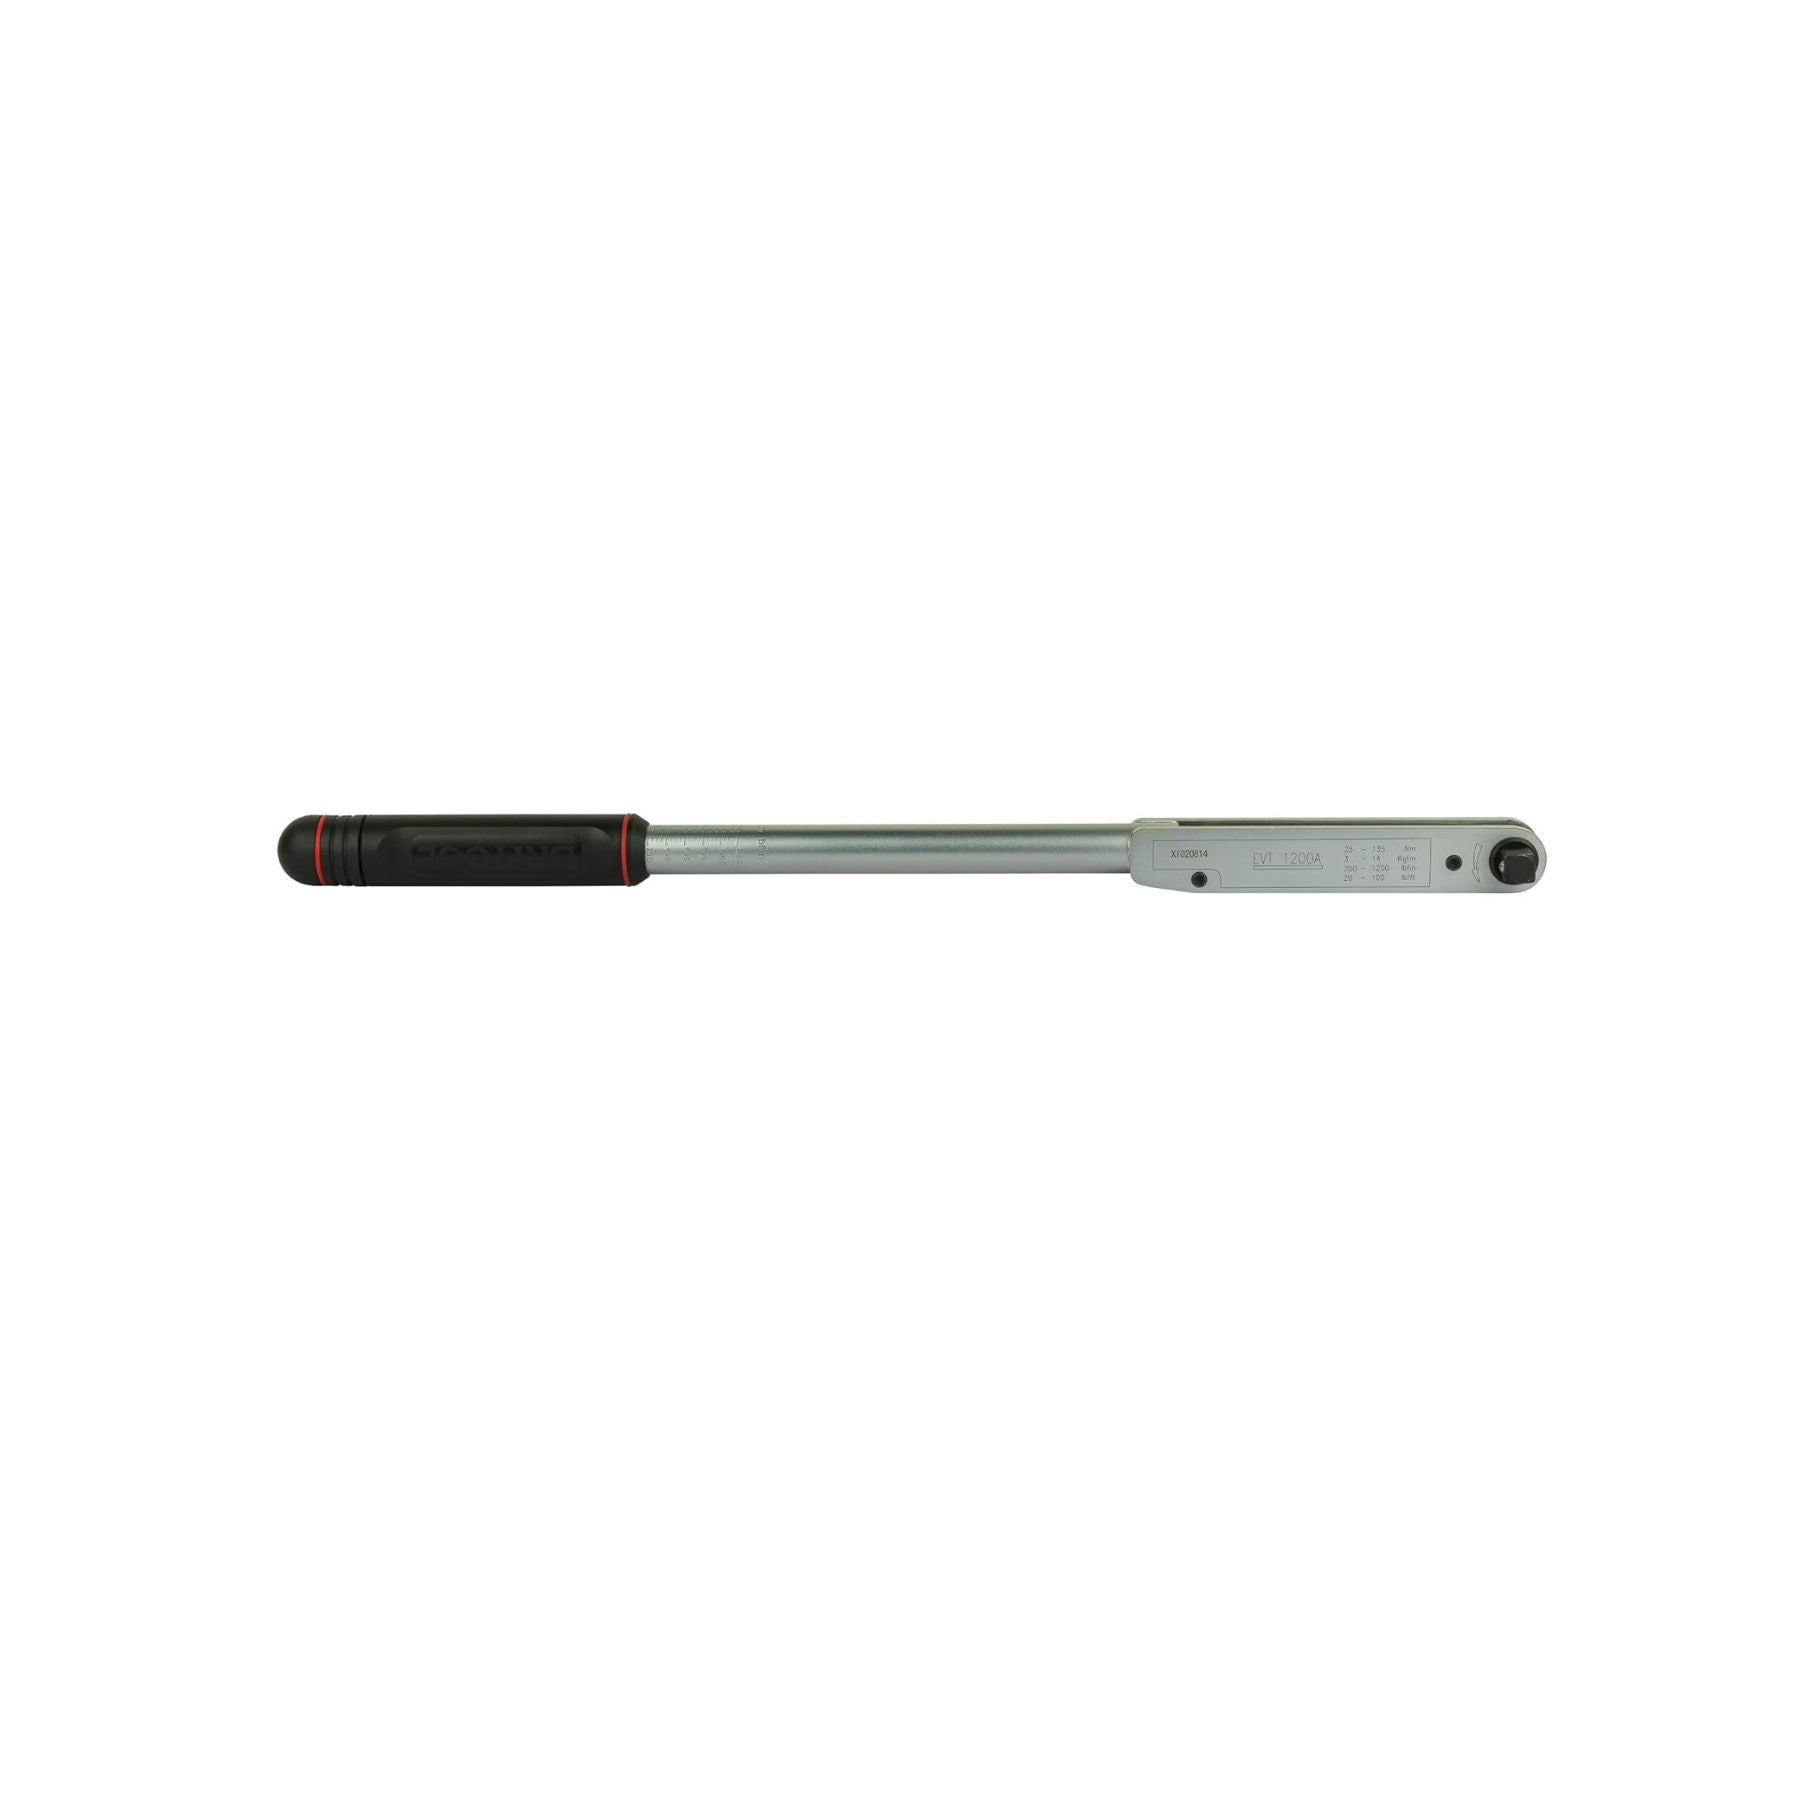 BRITOOL (EVT1200A) 1/2" SQ DR TORQUE WRENCH (25-135NM)